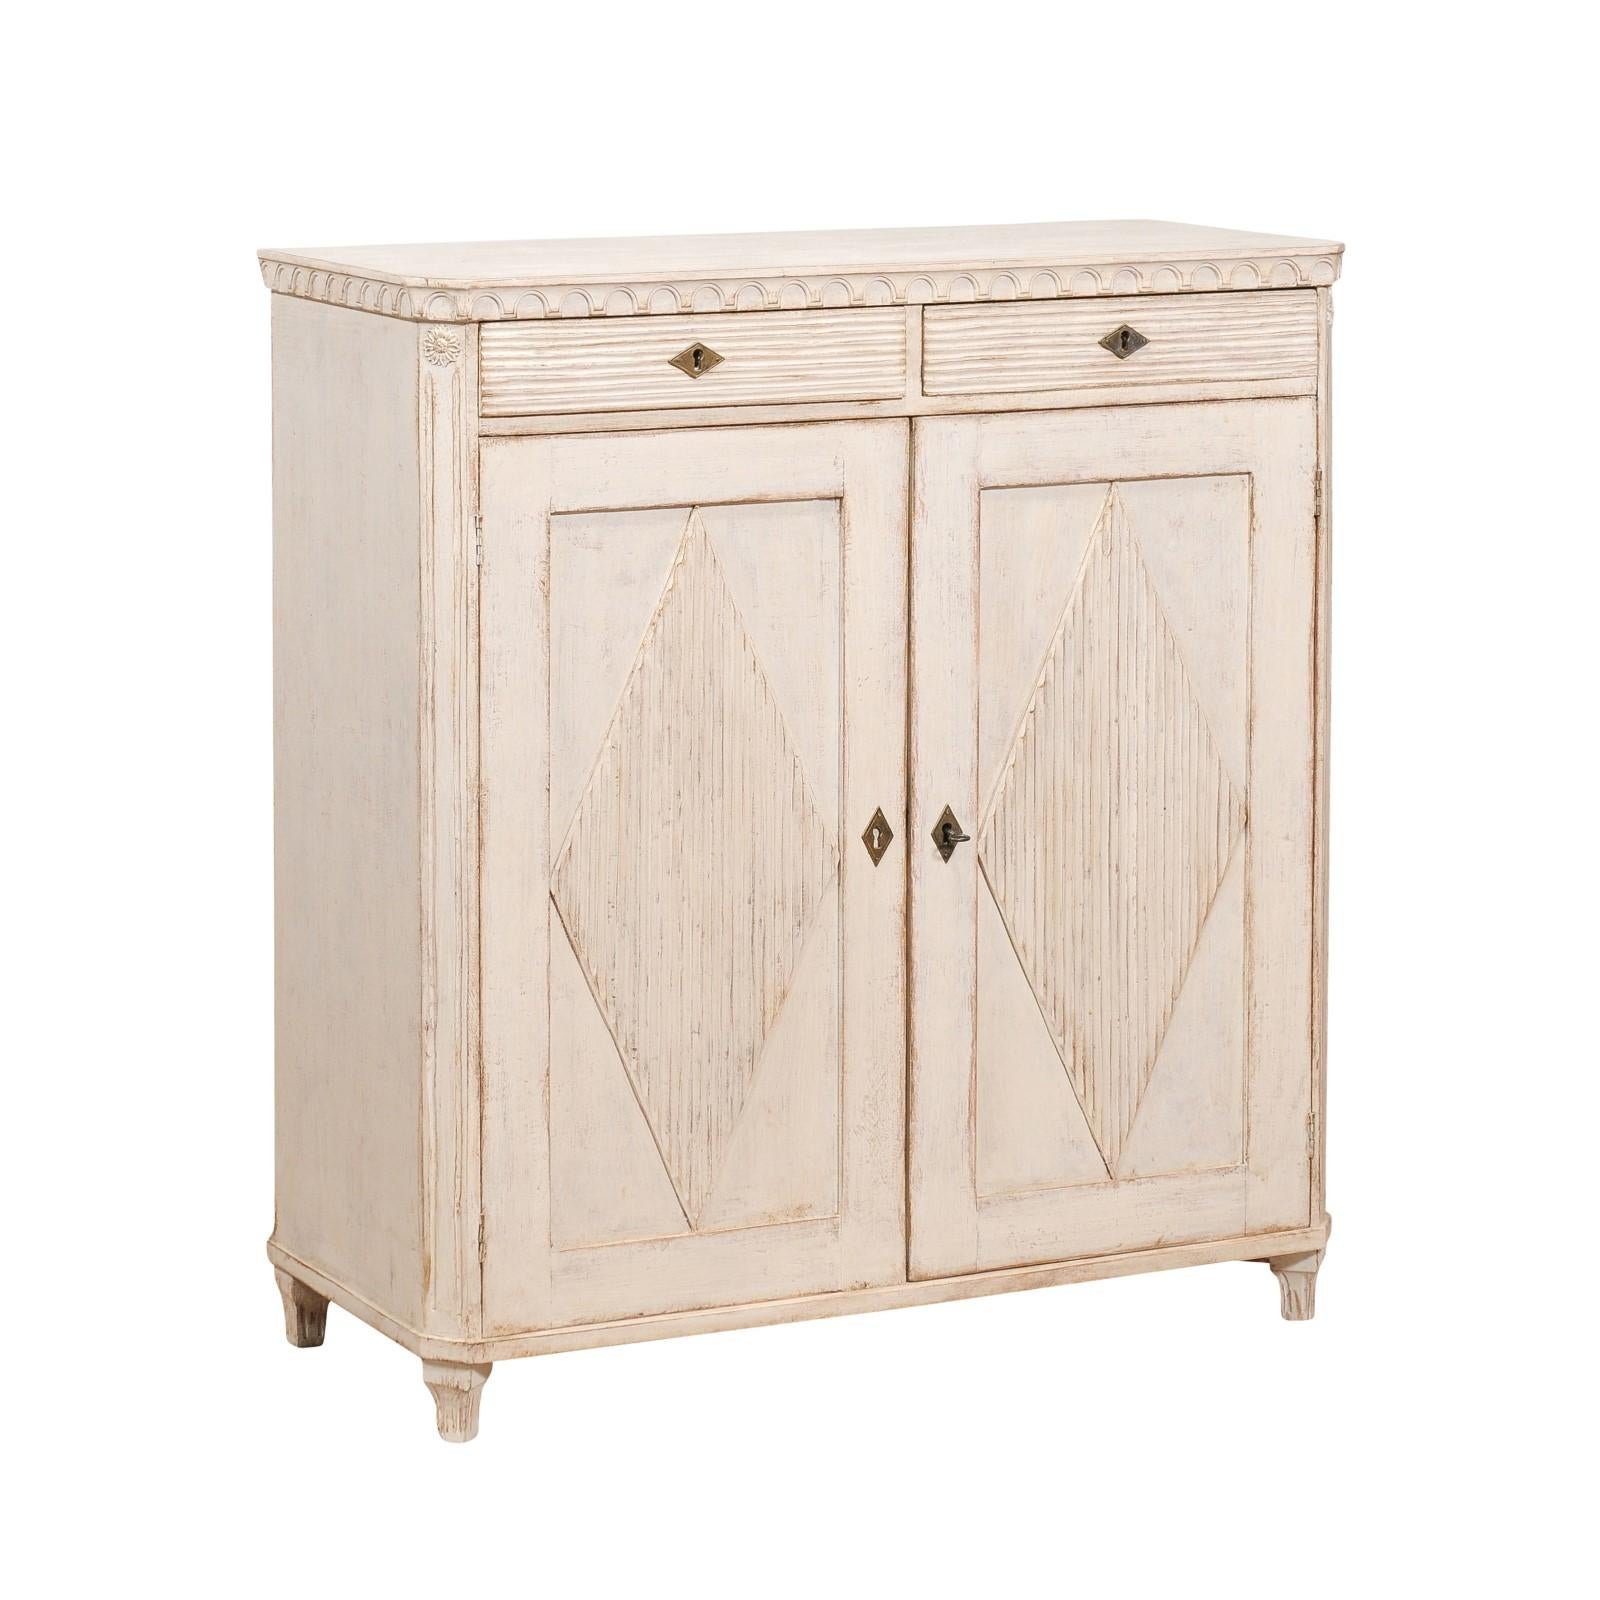 A Swedish Gustavian style sideboard from the 19th century with off white / light gray painted finish, carved diamond motifs and tapered feet. This exquisite Swedish Gustavian style sideboard from the 19th century embodies the timeless elegance and